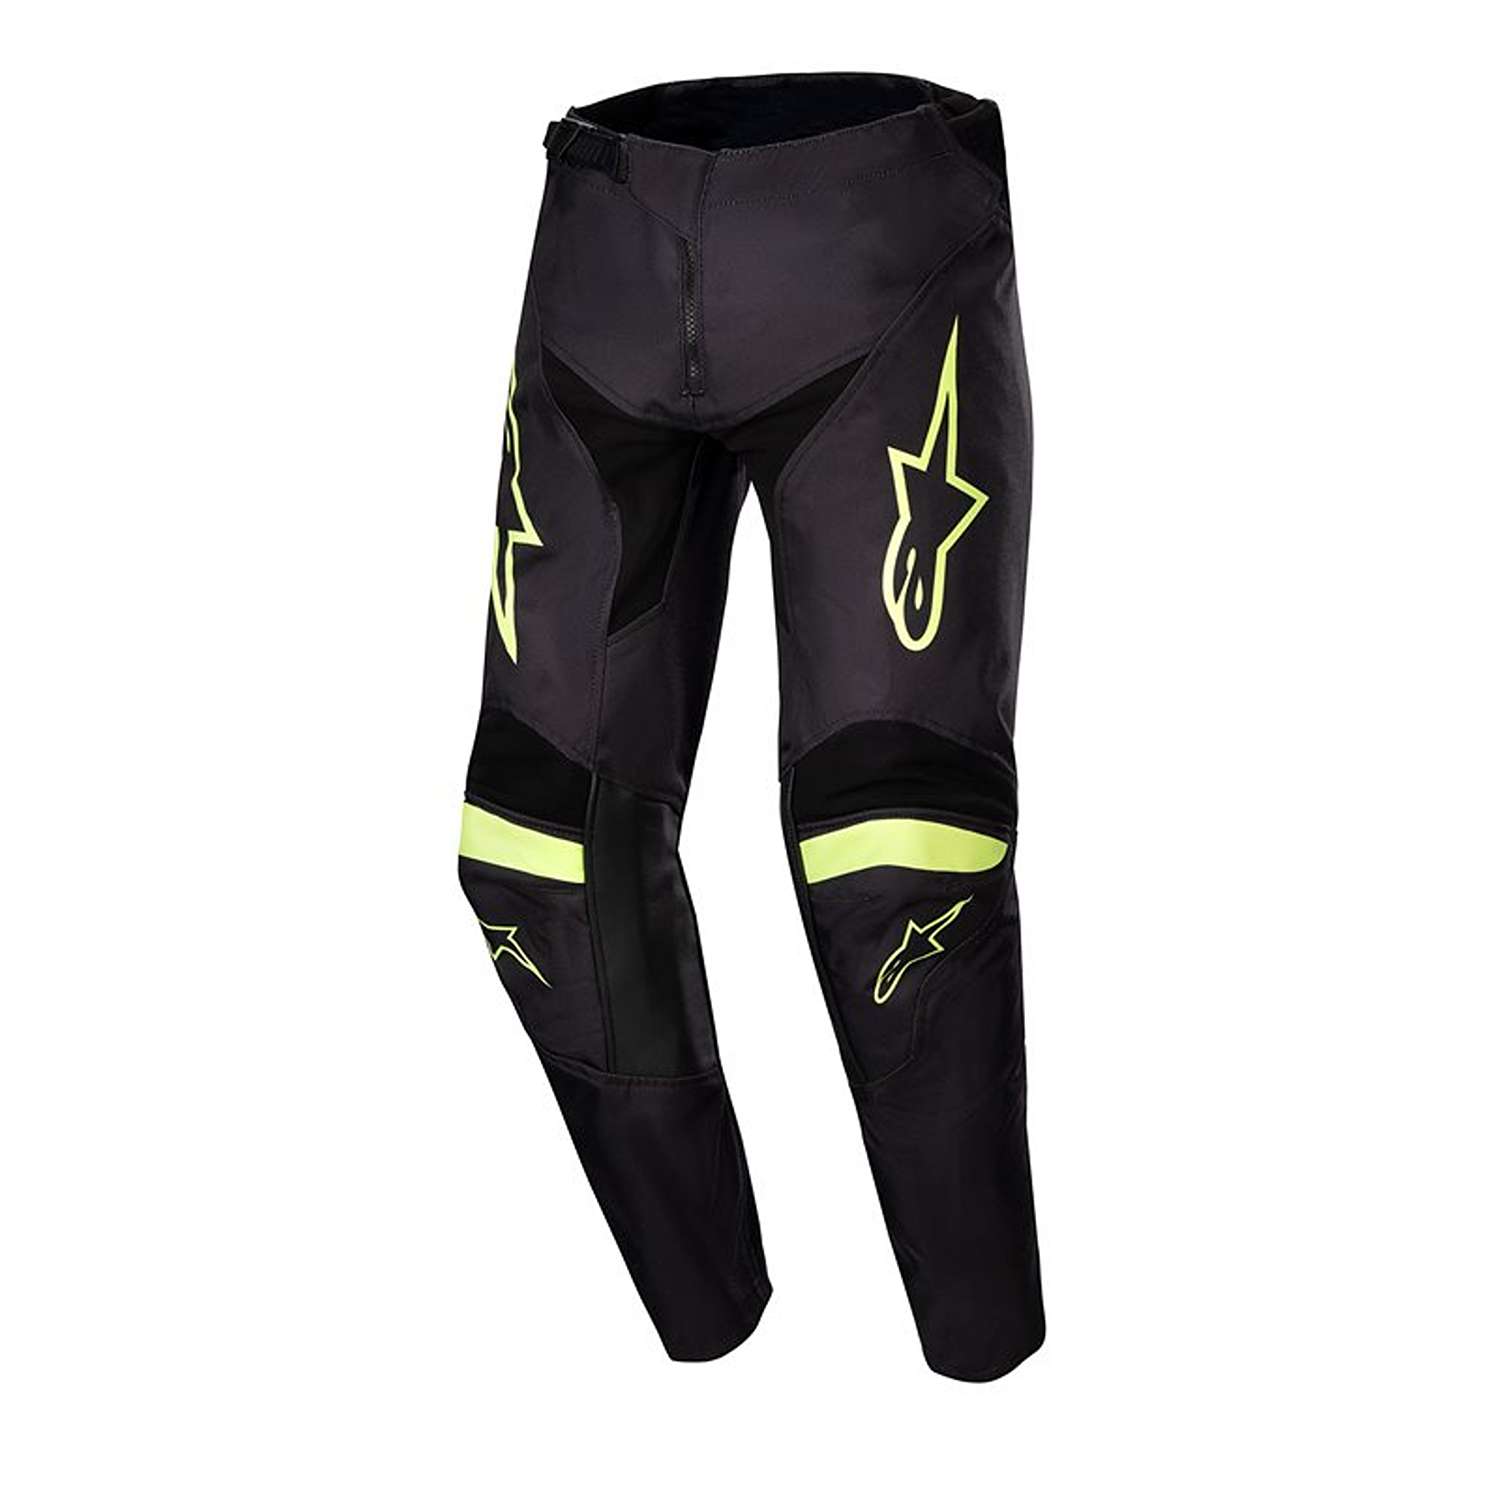 Image of Alpinestars Youth Racer Lurv Pants Black Yellow Fluo Taille 26